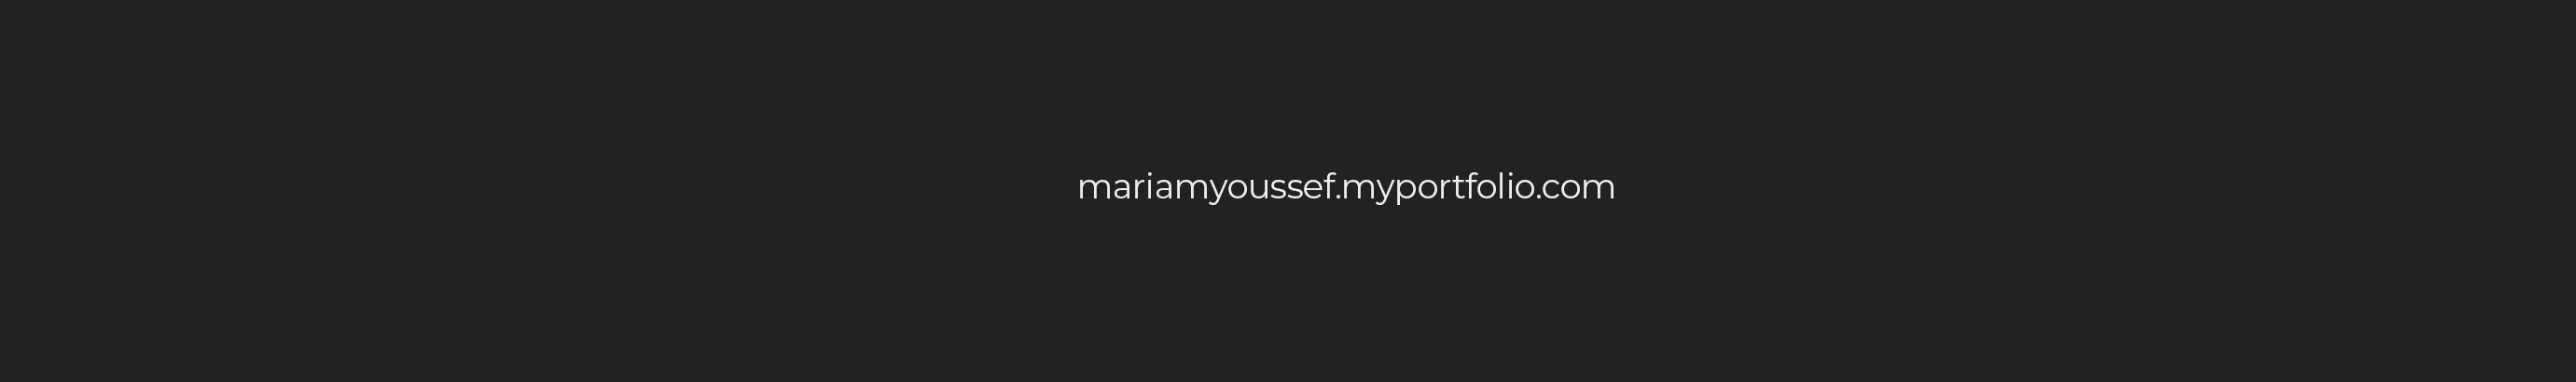 Mariam Youssef's profile banner